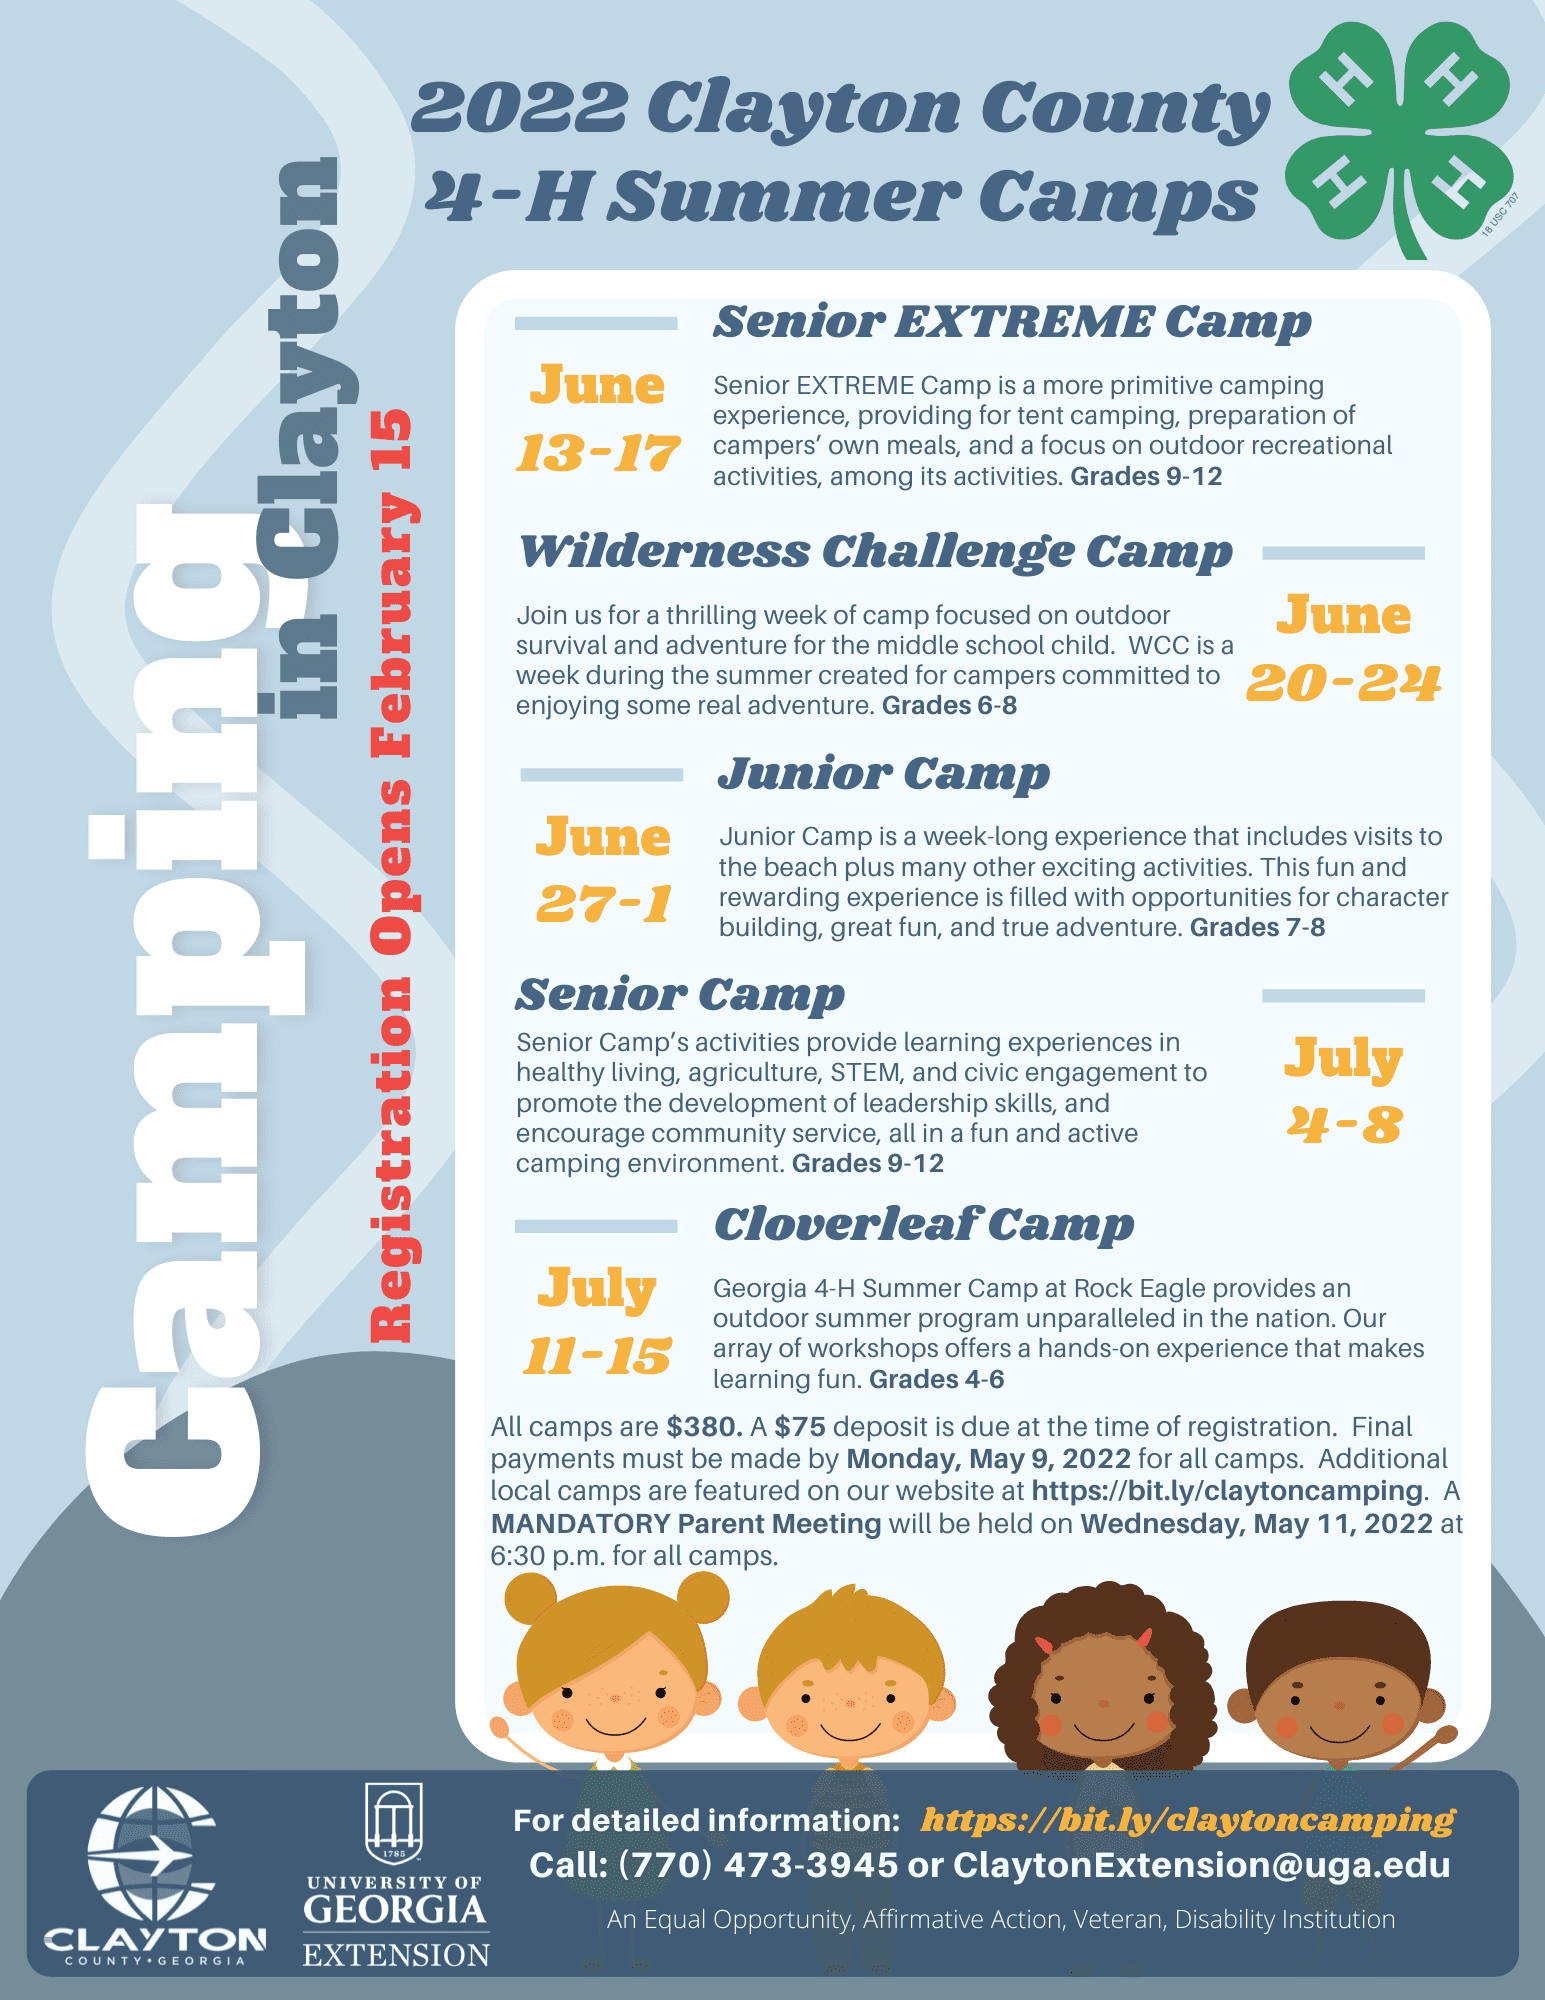 4H Summer Camps Clayton County,